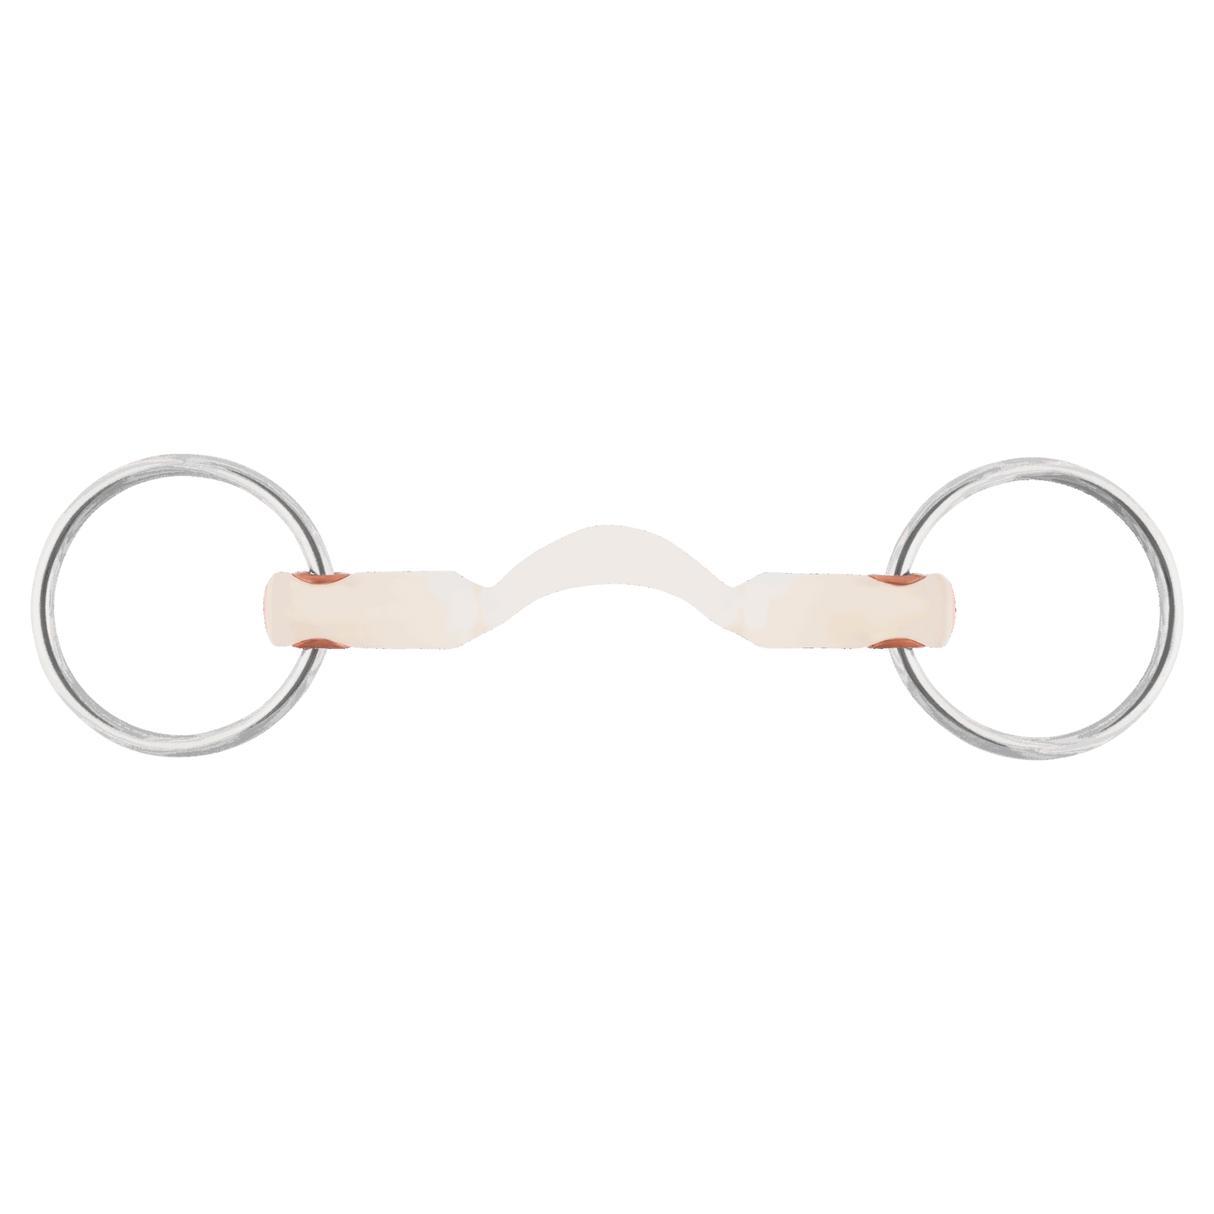 Sprenger Nathe Normal 20mm Mullen Mouth Snaffle 70mm Ring With Port